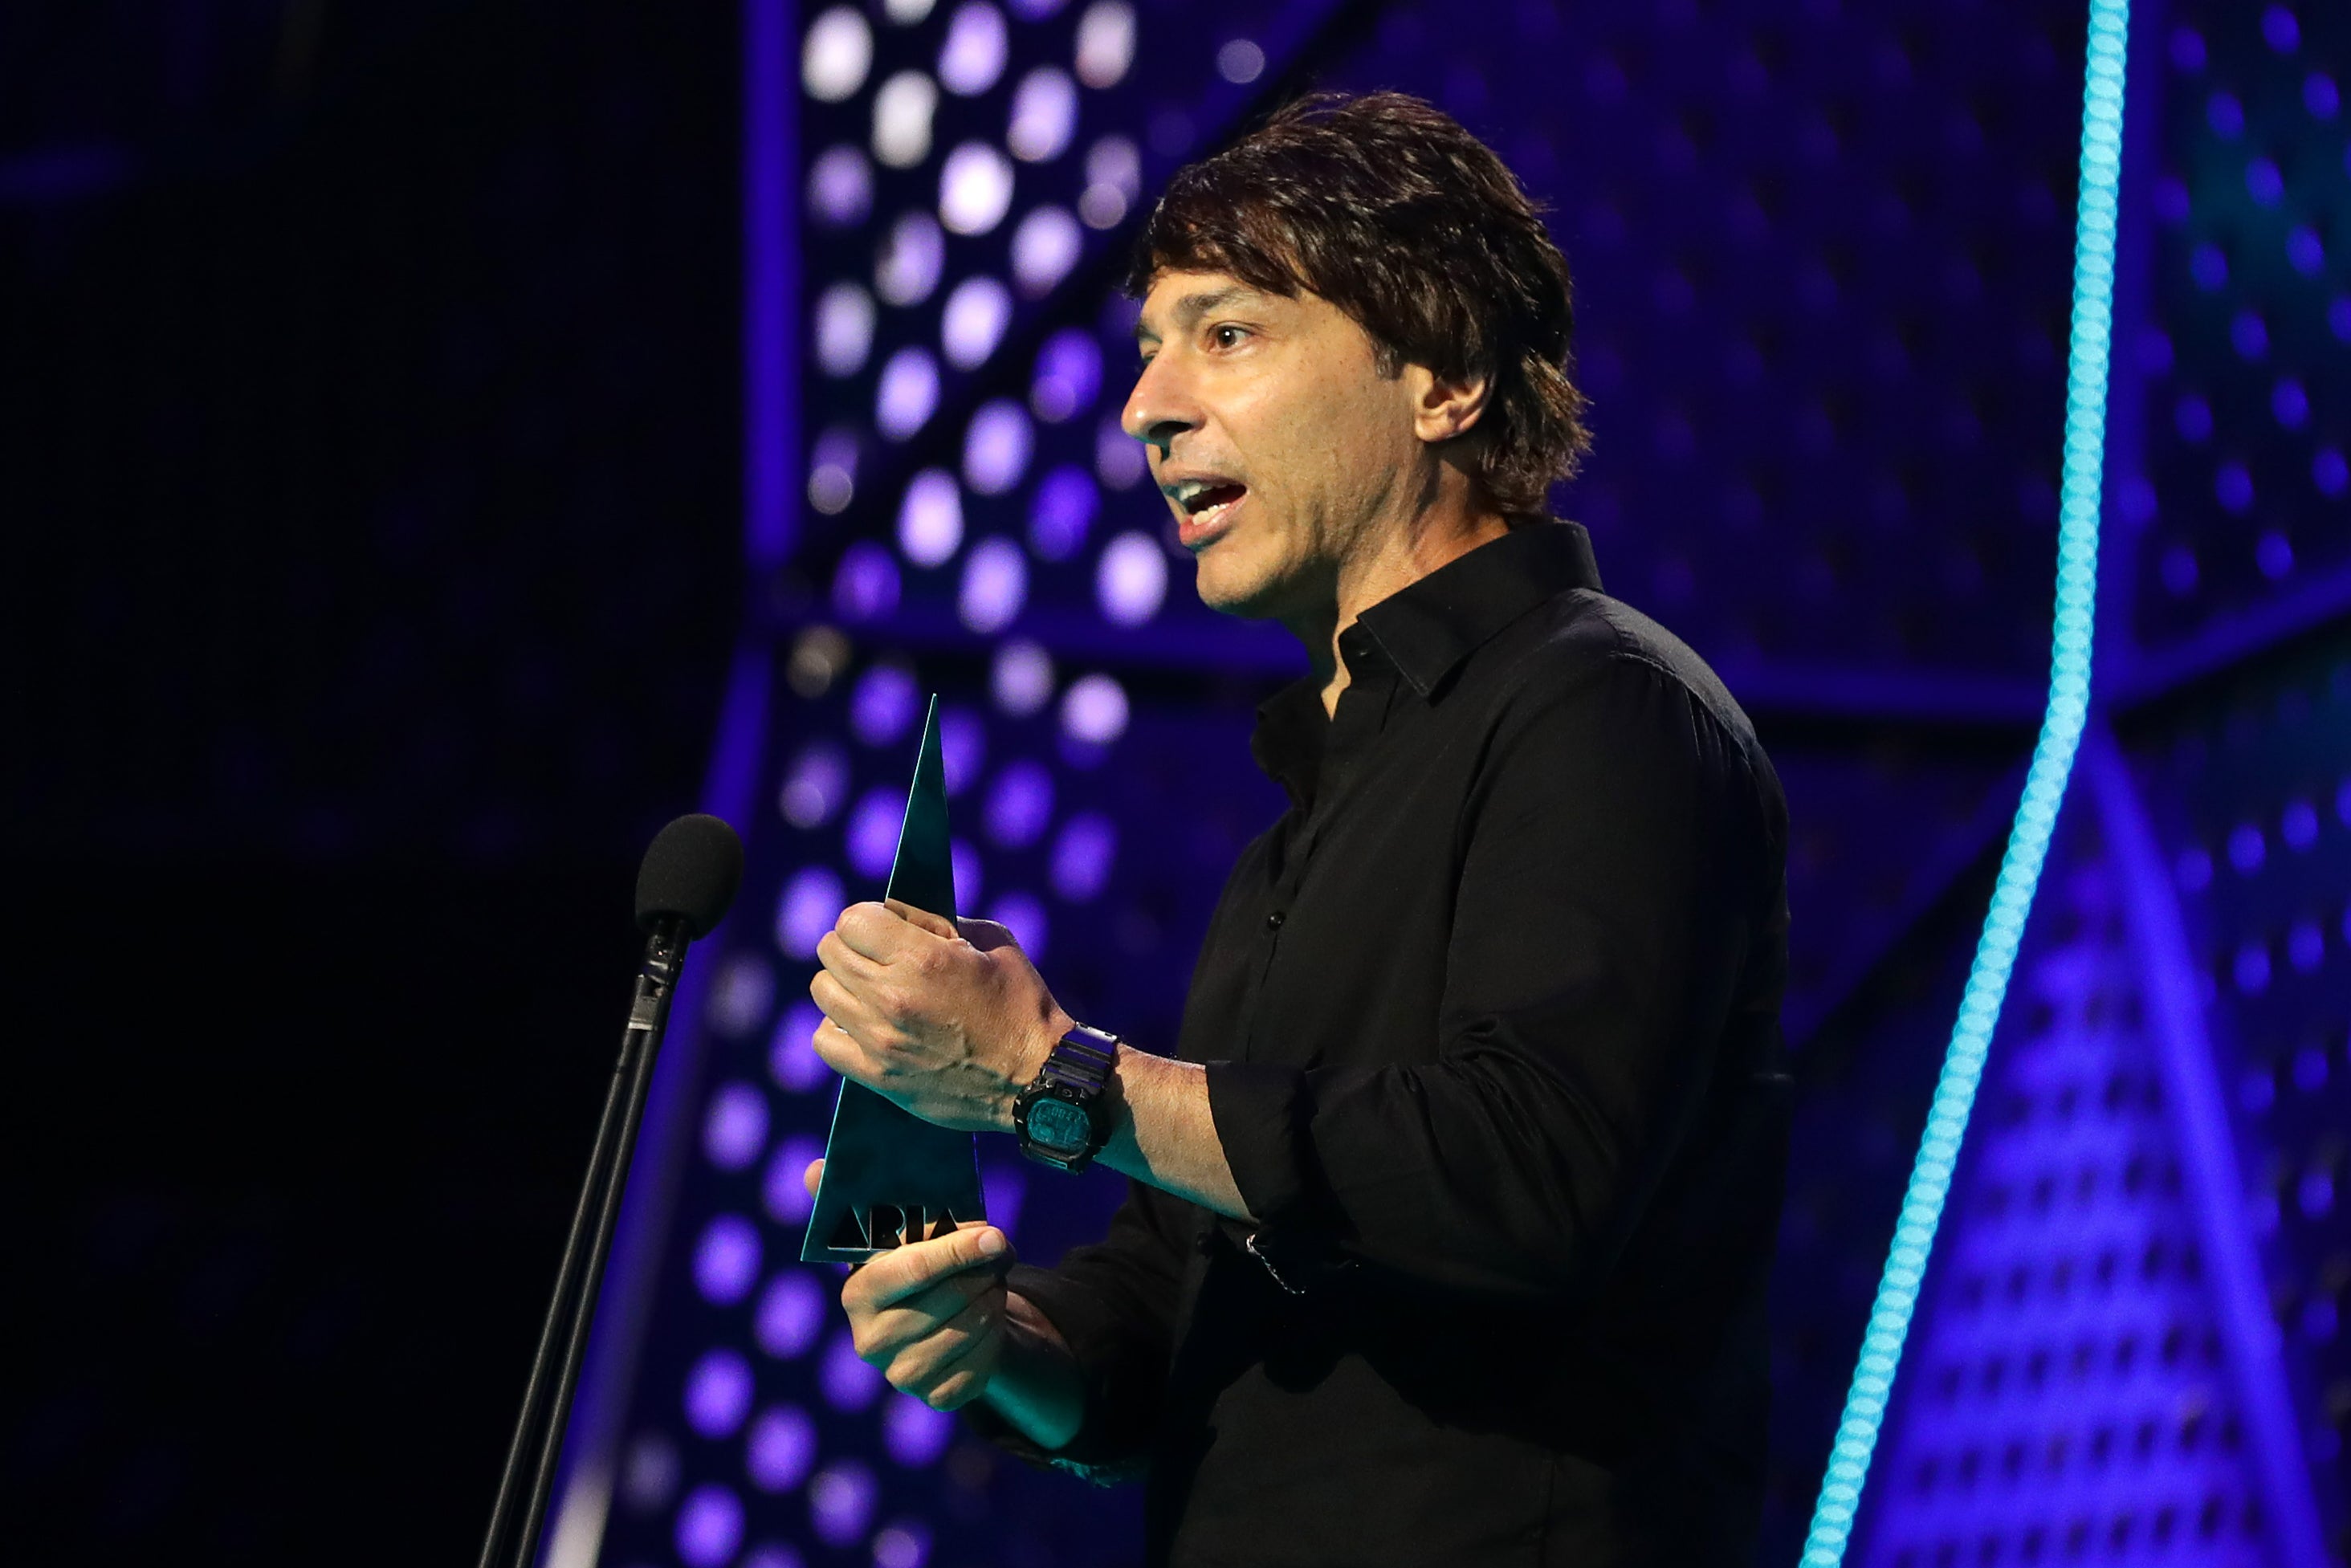 comedian arj barker’s decision to kick ‘breastfeeding’ mother and baby out of show sparks outrage